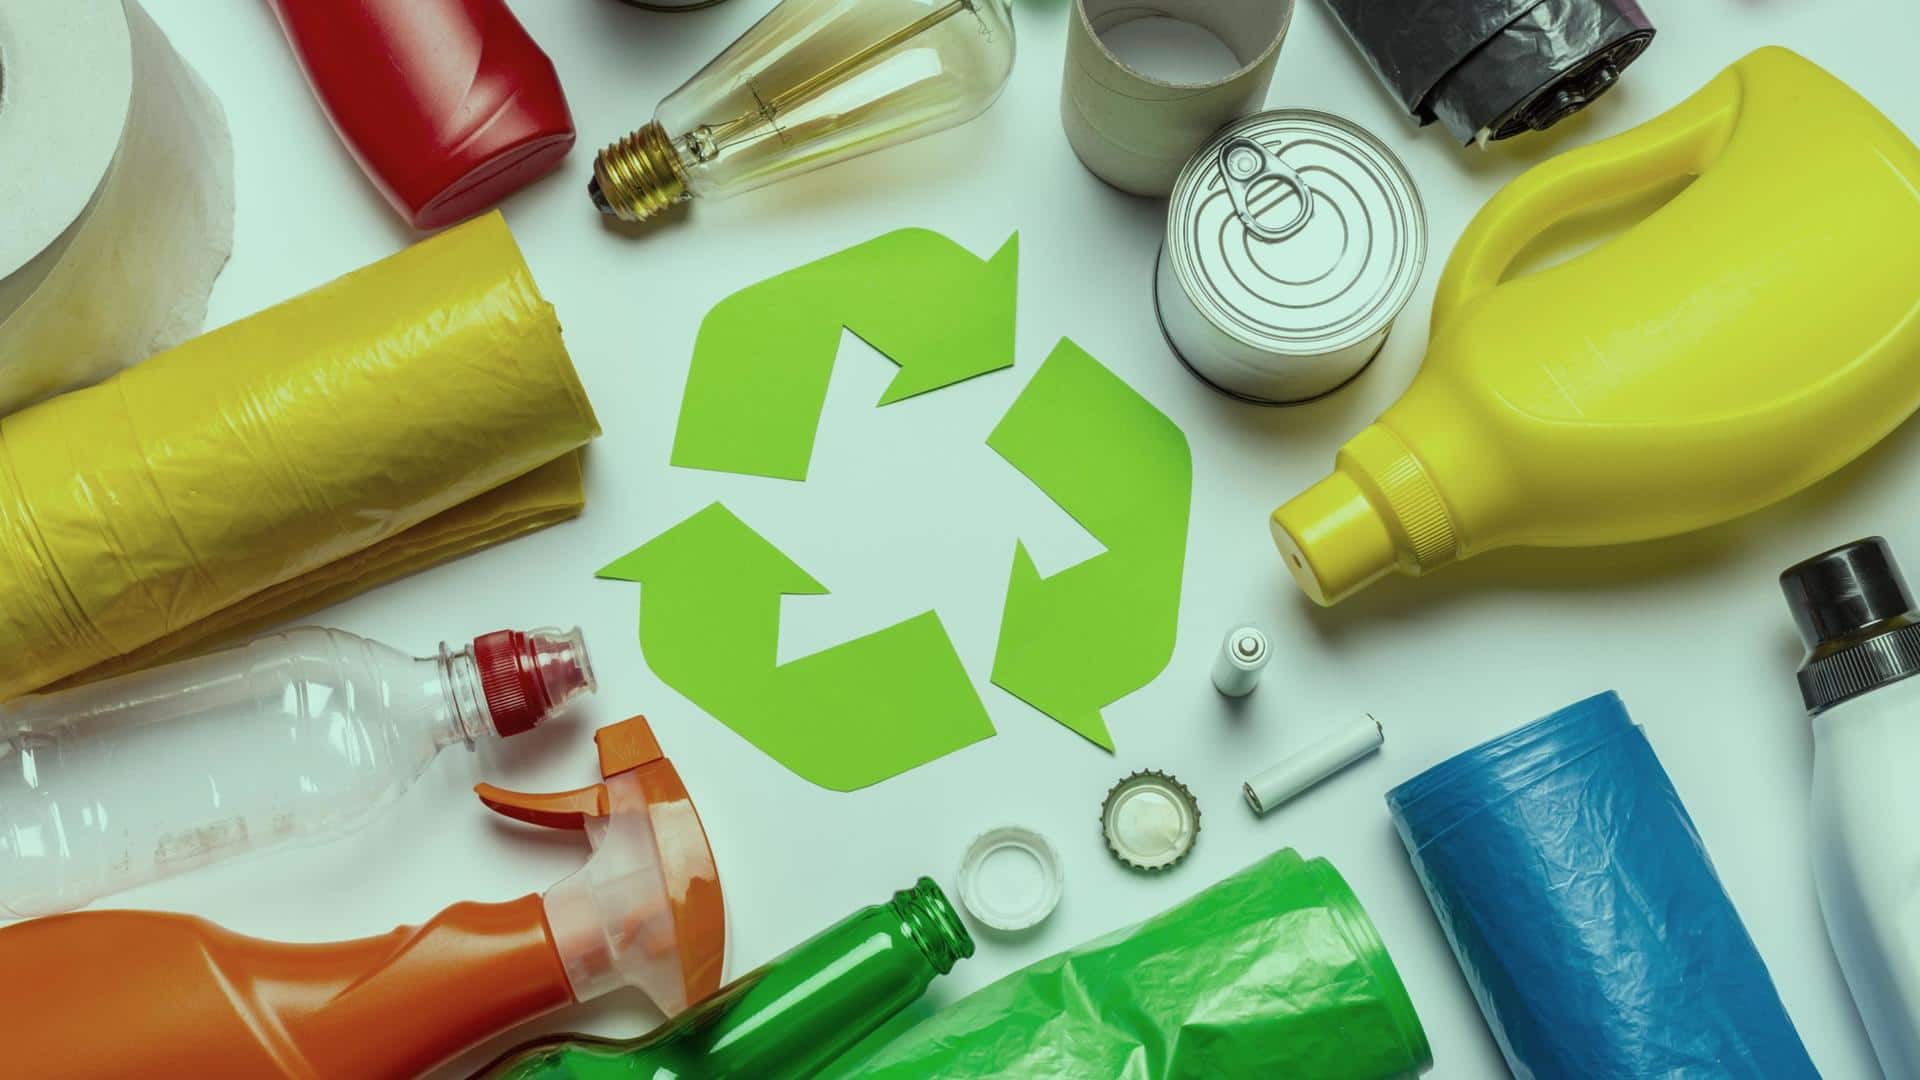 Common household items that you can easily recycle or repurpose